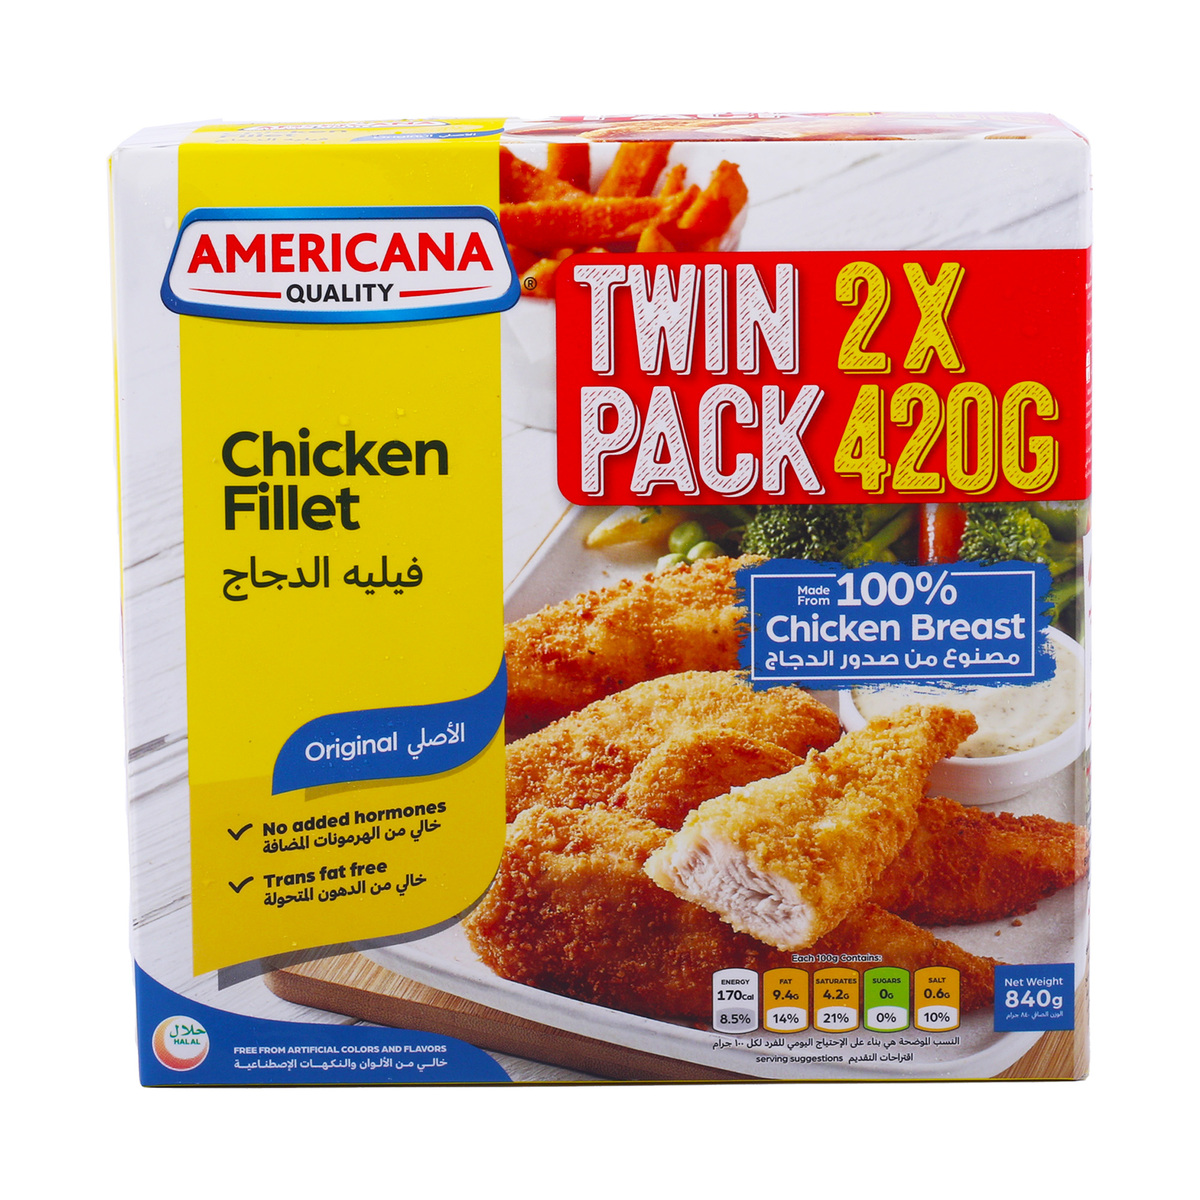 Americana Chicken Fillet Value Pack 2 x 420 g Online at Best Price, Nuggets